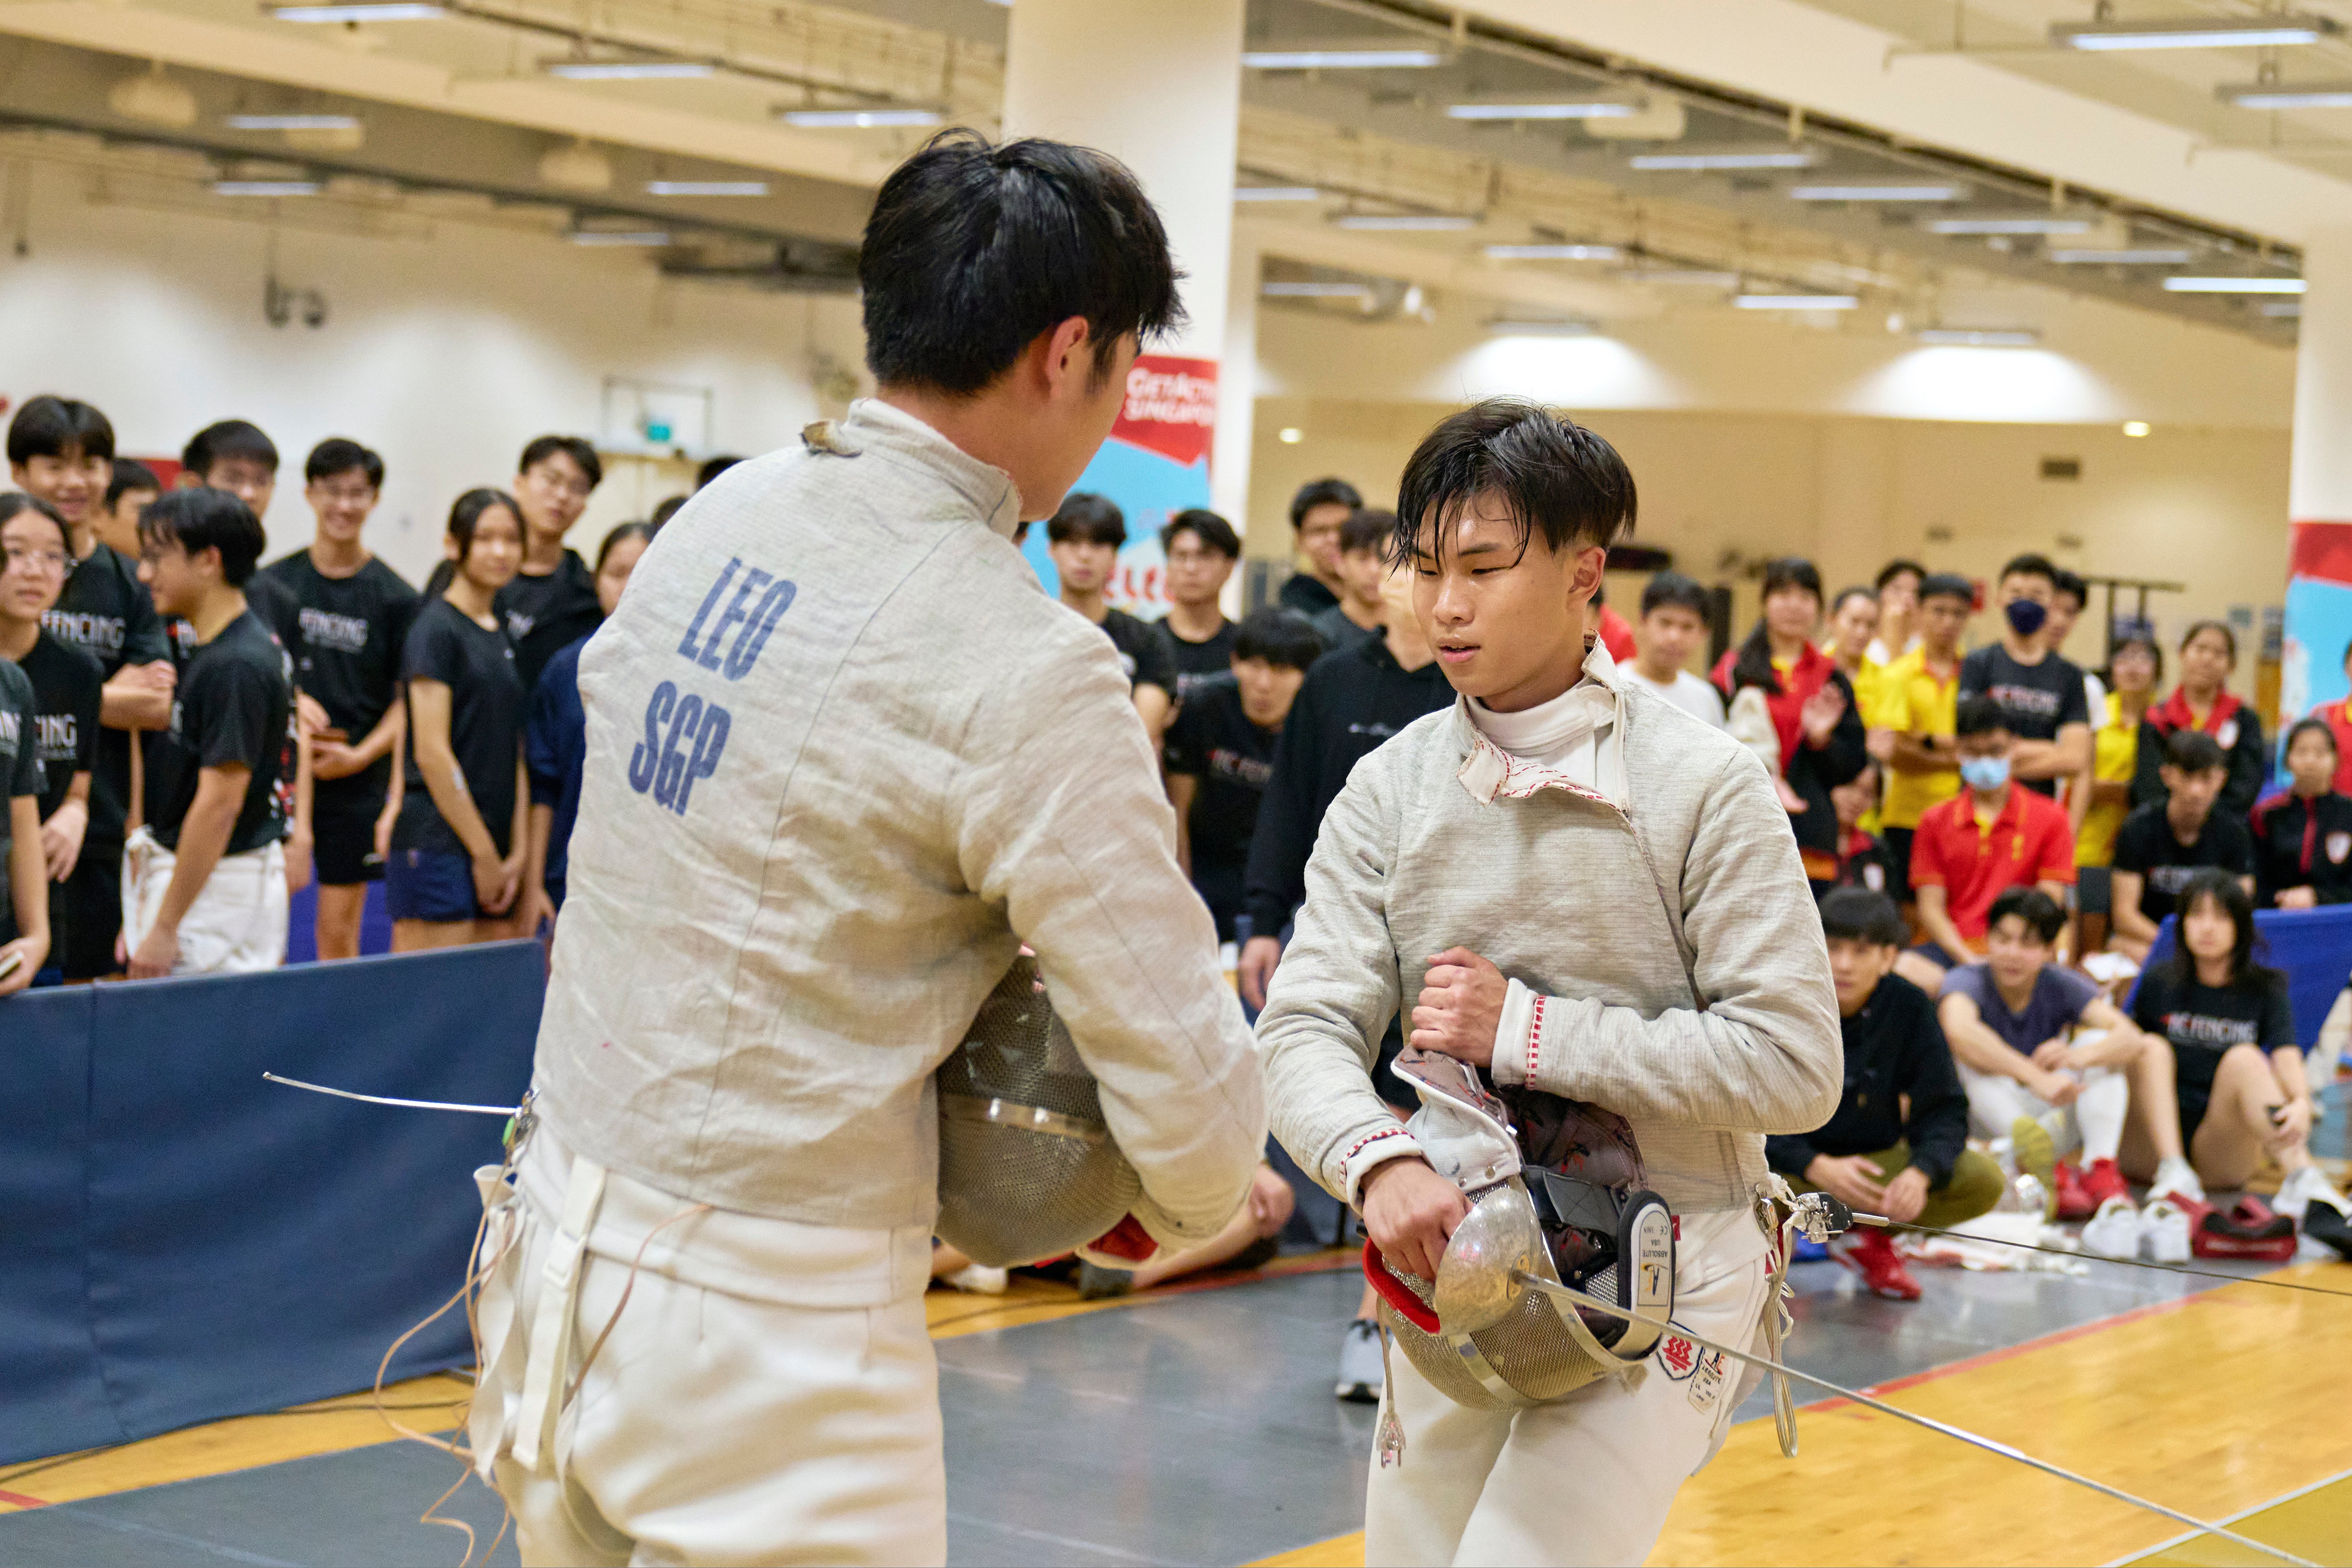 2023_04_20 Fencing Sabre A Div Boys Photo by Eric Koh, Finalists acknowlegde each other after the match DSC09586